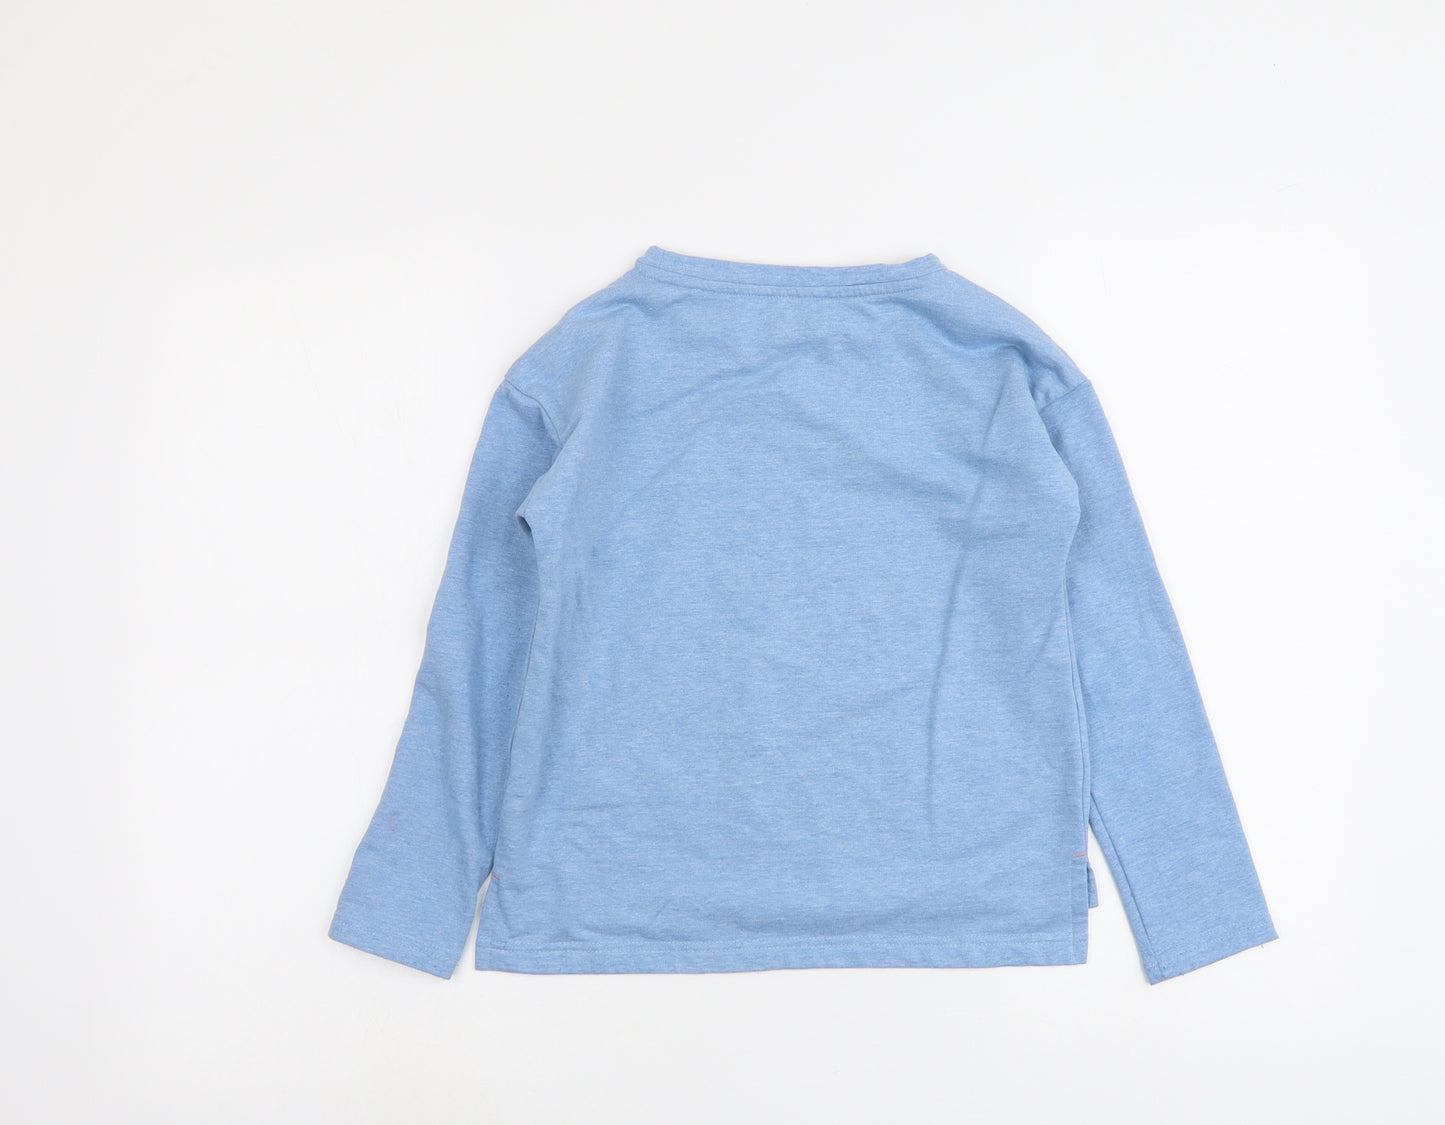 Lily&Dan Girls Blue Cotton Basic T-Shirt Size 9-10 Years Round Neck Pullover - Soul Mate Forever